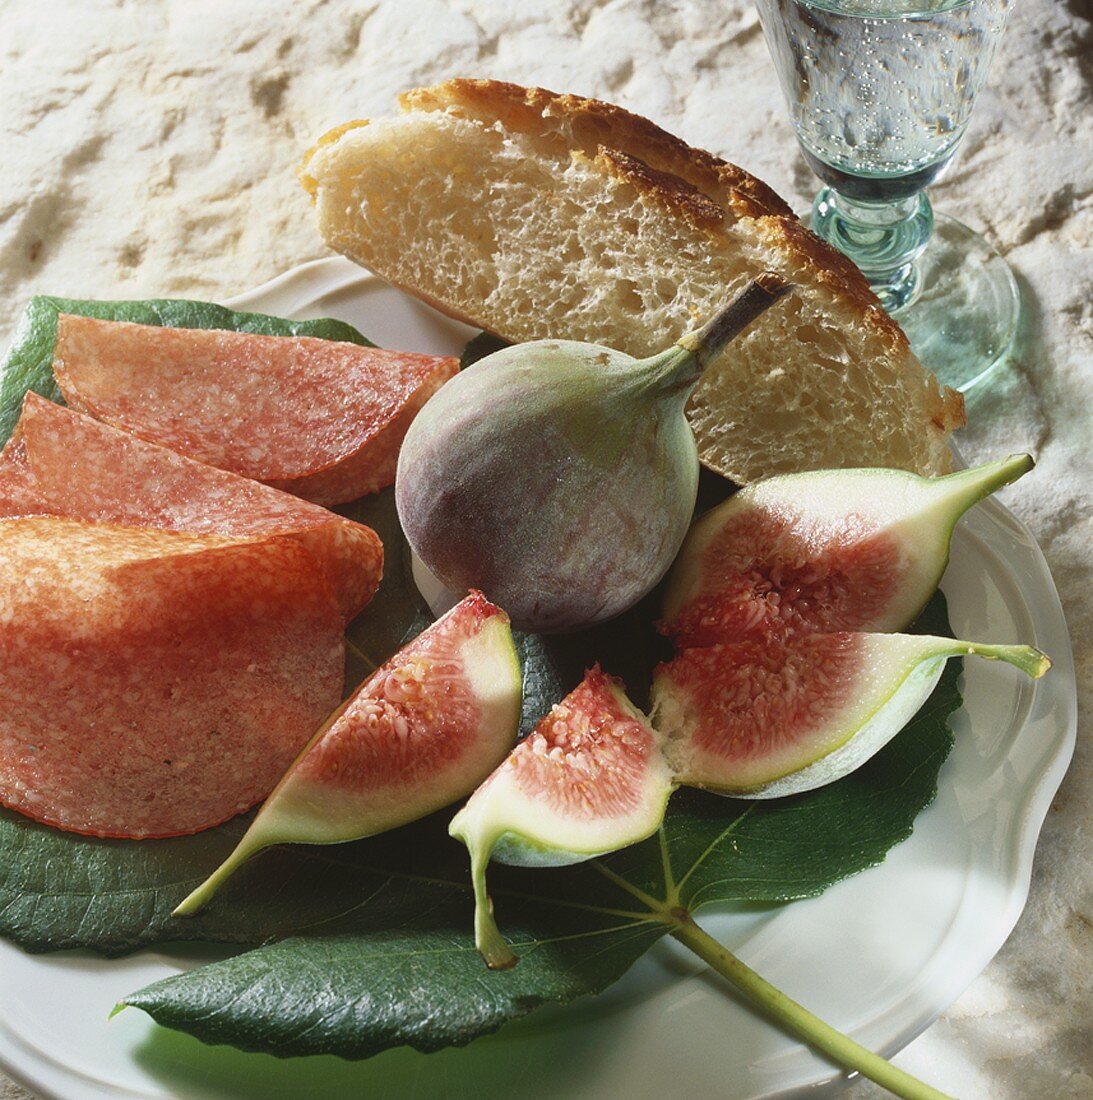 Figs with salami (appetiser)